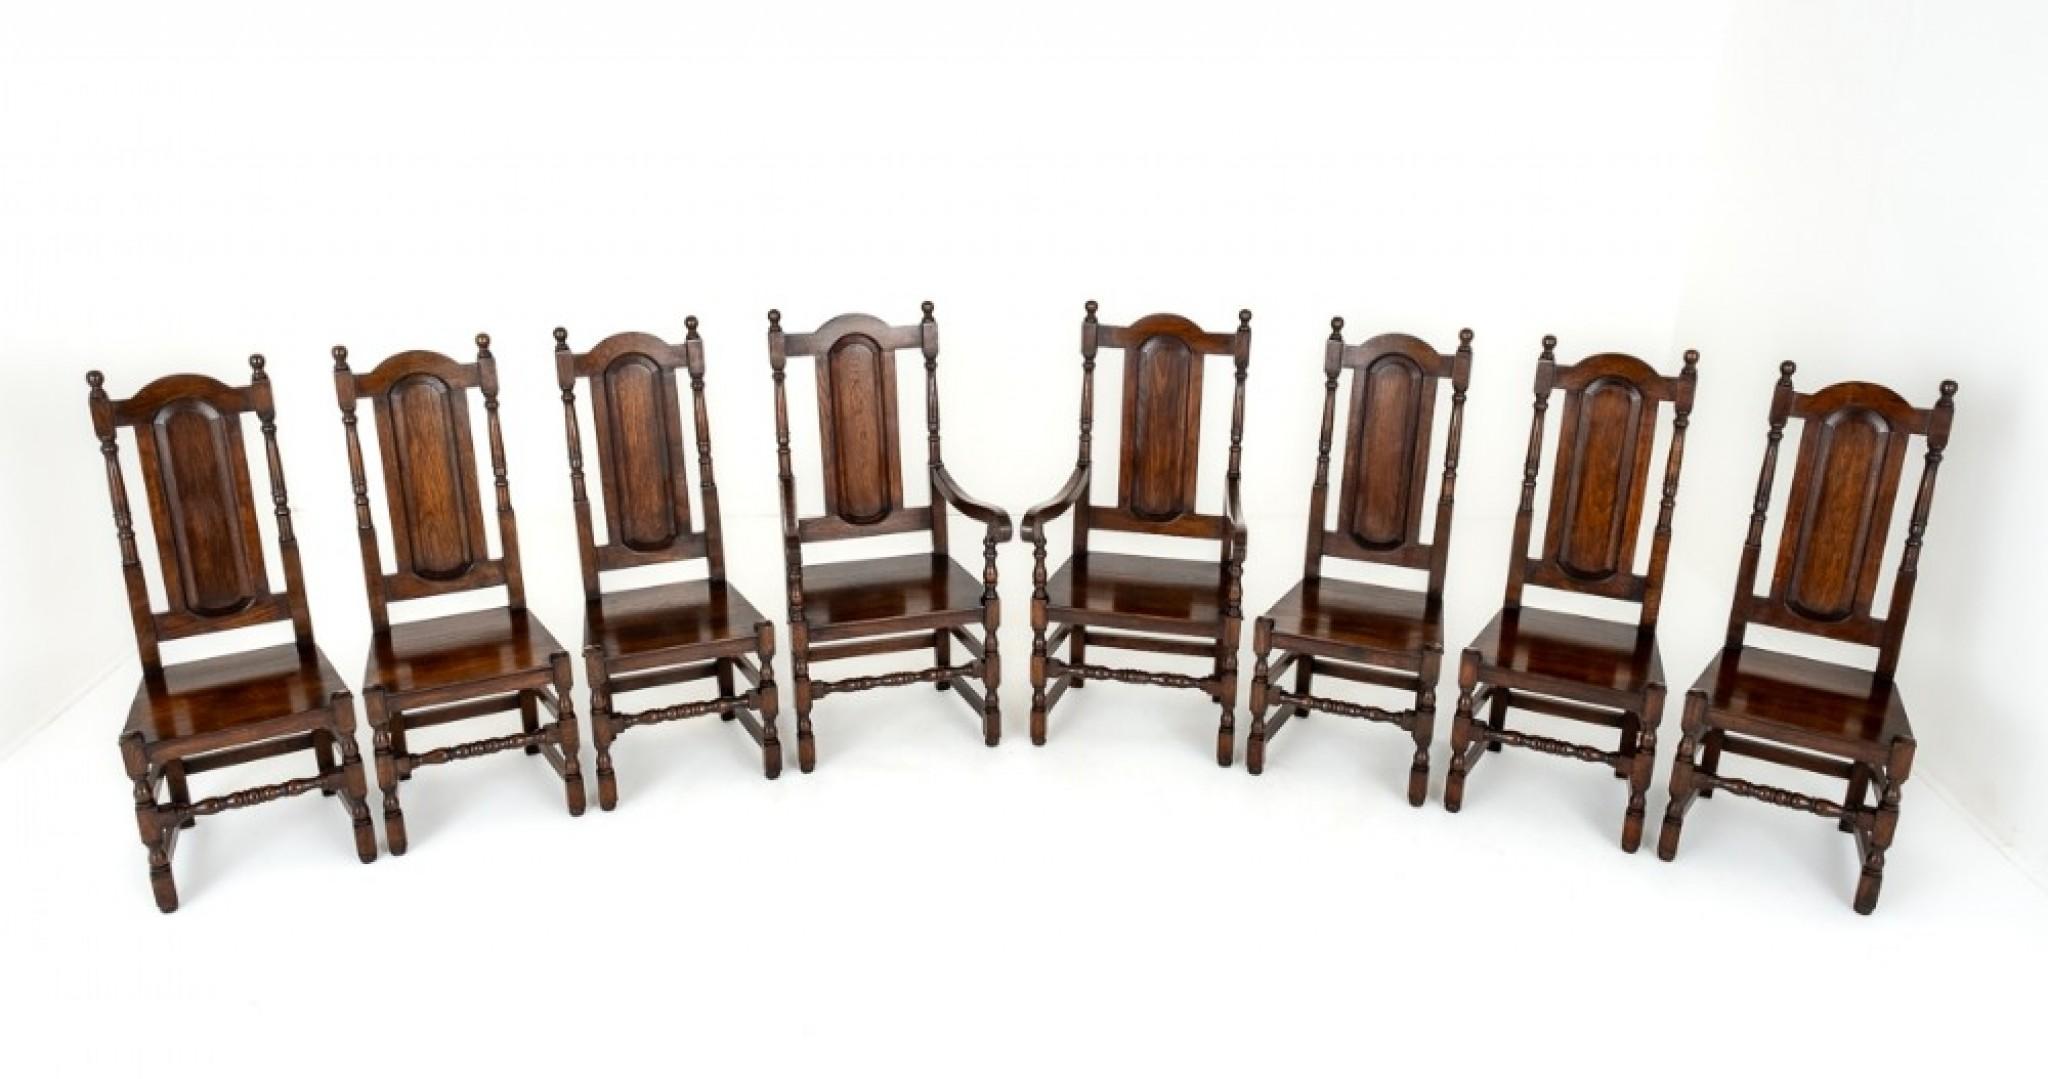 Set of 8 (6+2) Tudor style oak chairs. These chairs feature a paneled back and paneled seats. The chairs having turned uprights to the backs. The shaped arms being supported by shaped columns. The chairs having a turned front stretcher. Circa 1930.